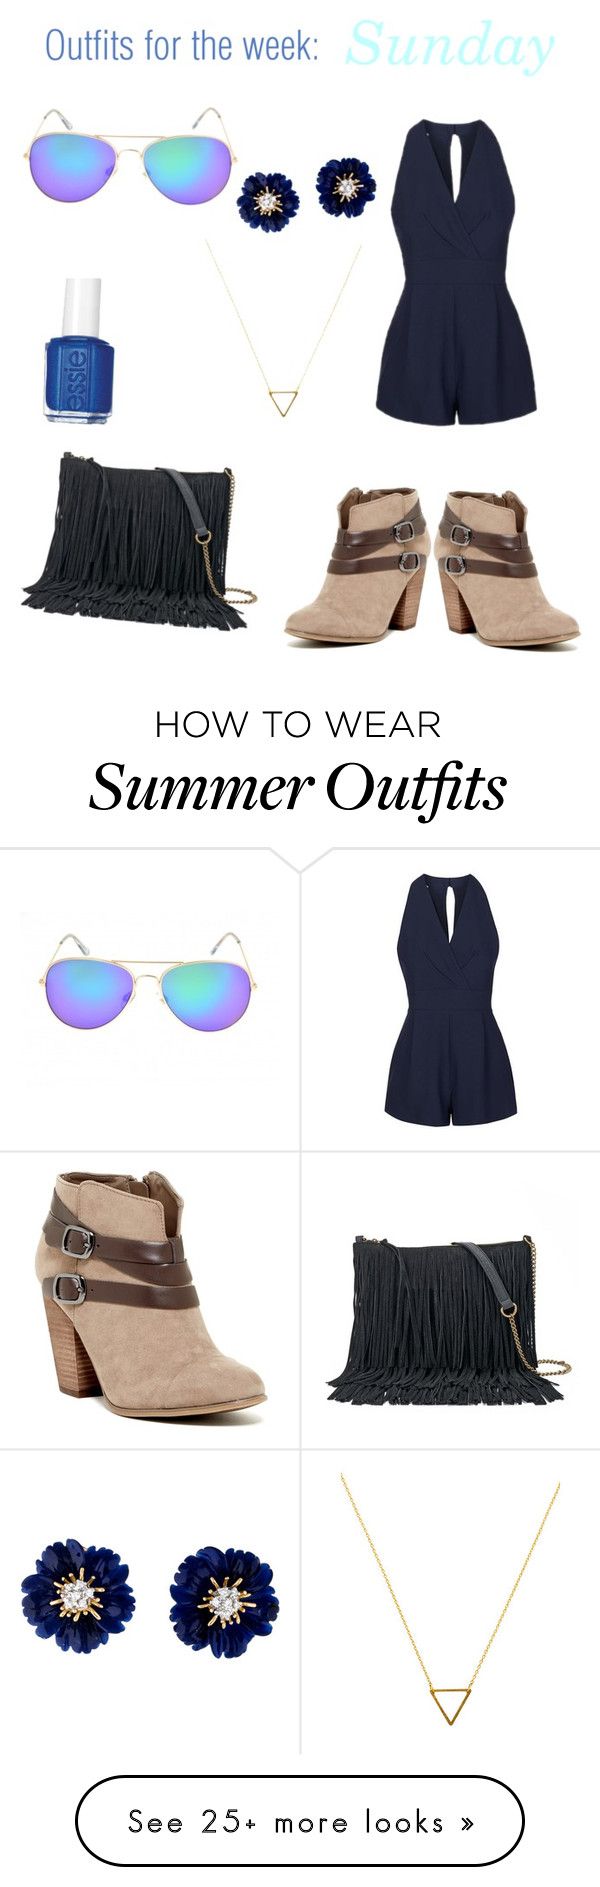 "Outfit ideas for the week: Sunday" by maryamtheunicorn on Polyvore fe...